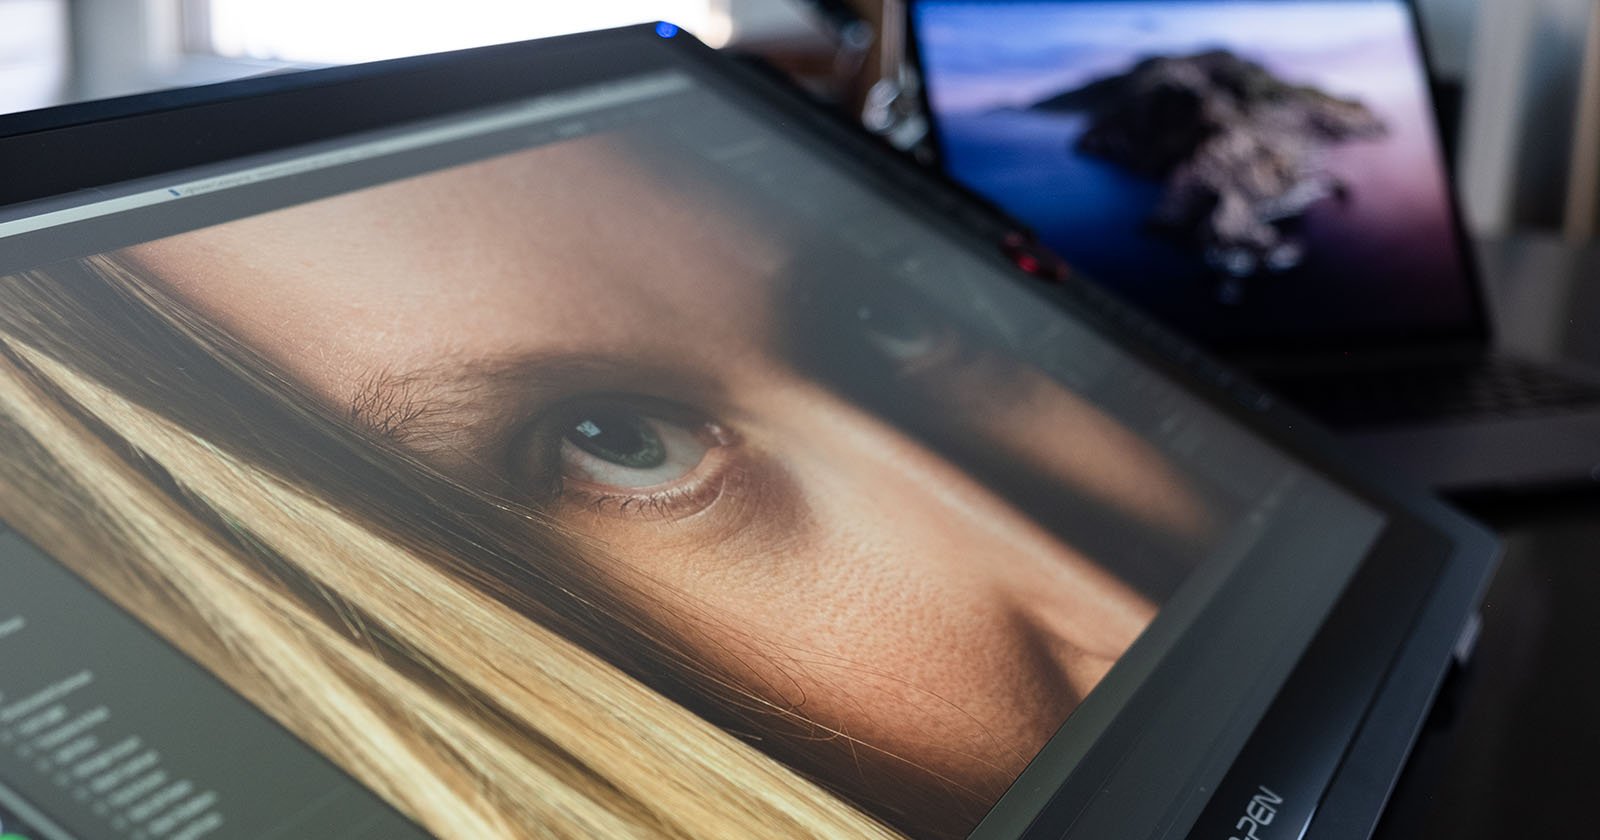 XP-Pen Artist Pro 24 Review: Editing Photos on a 24-Inch Pen Display